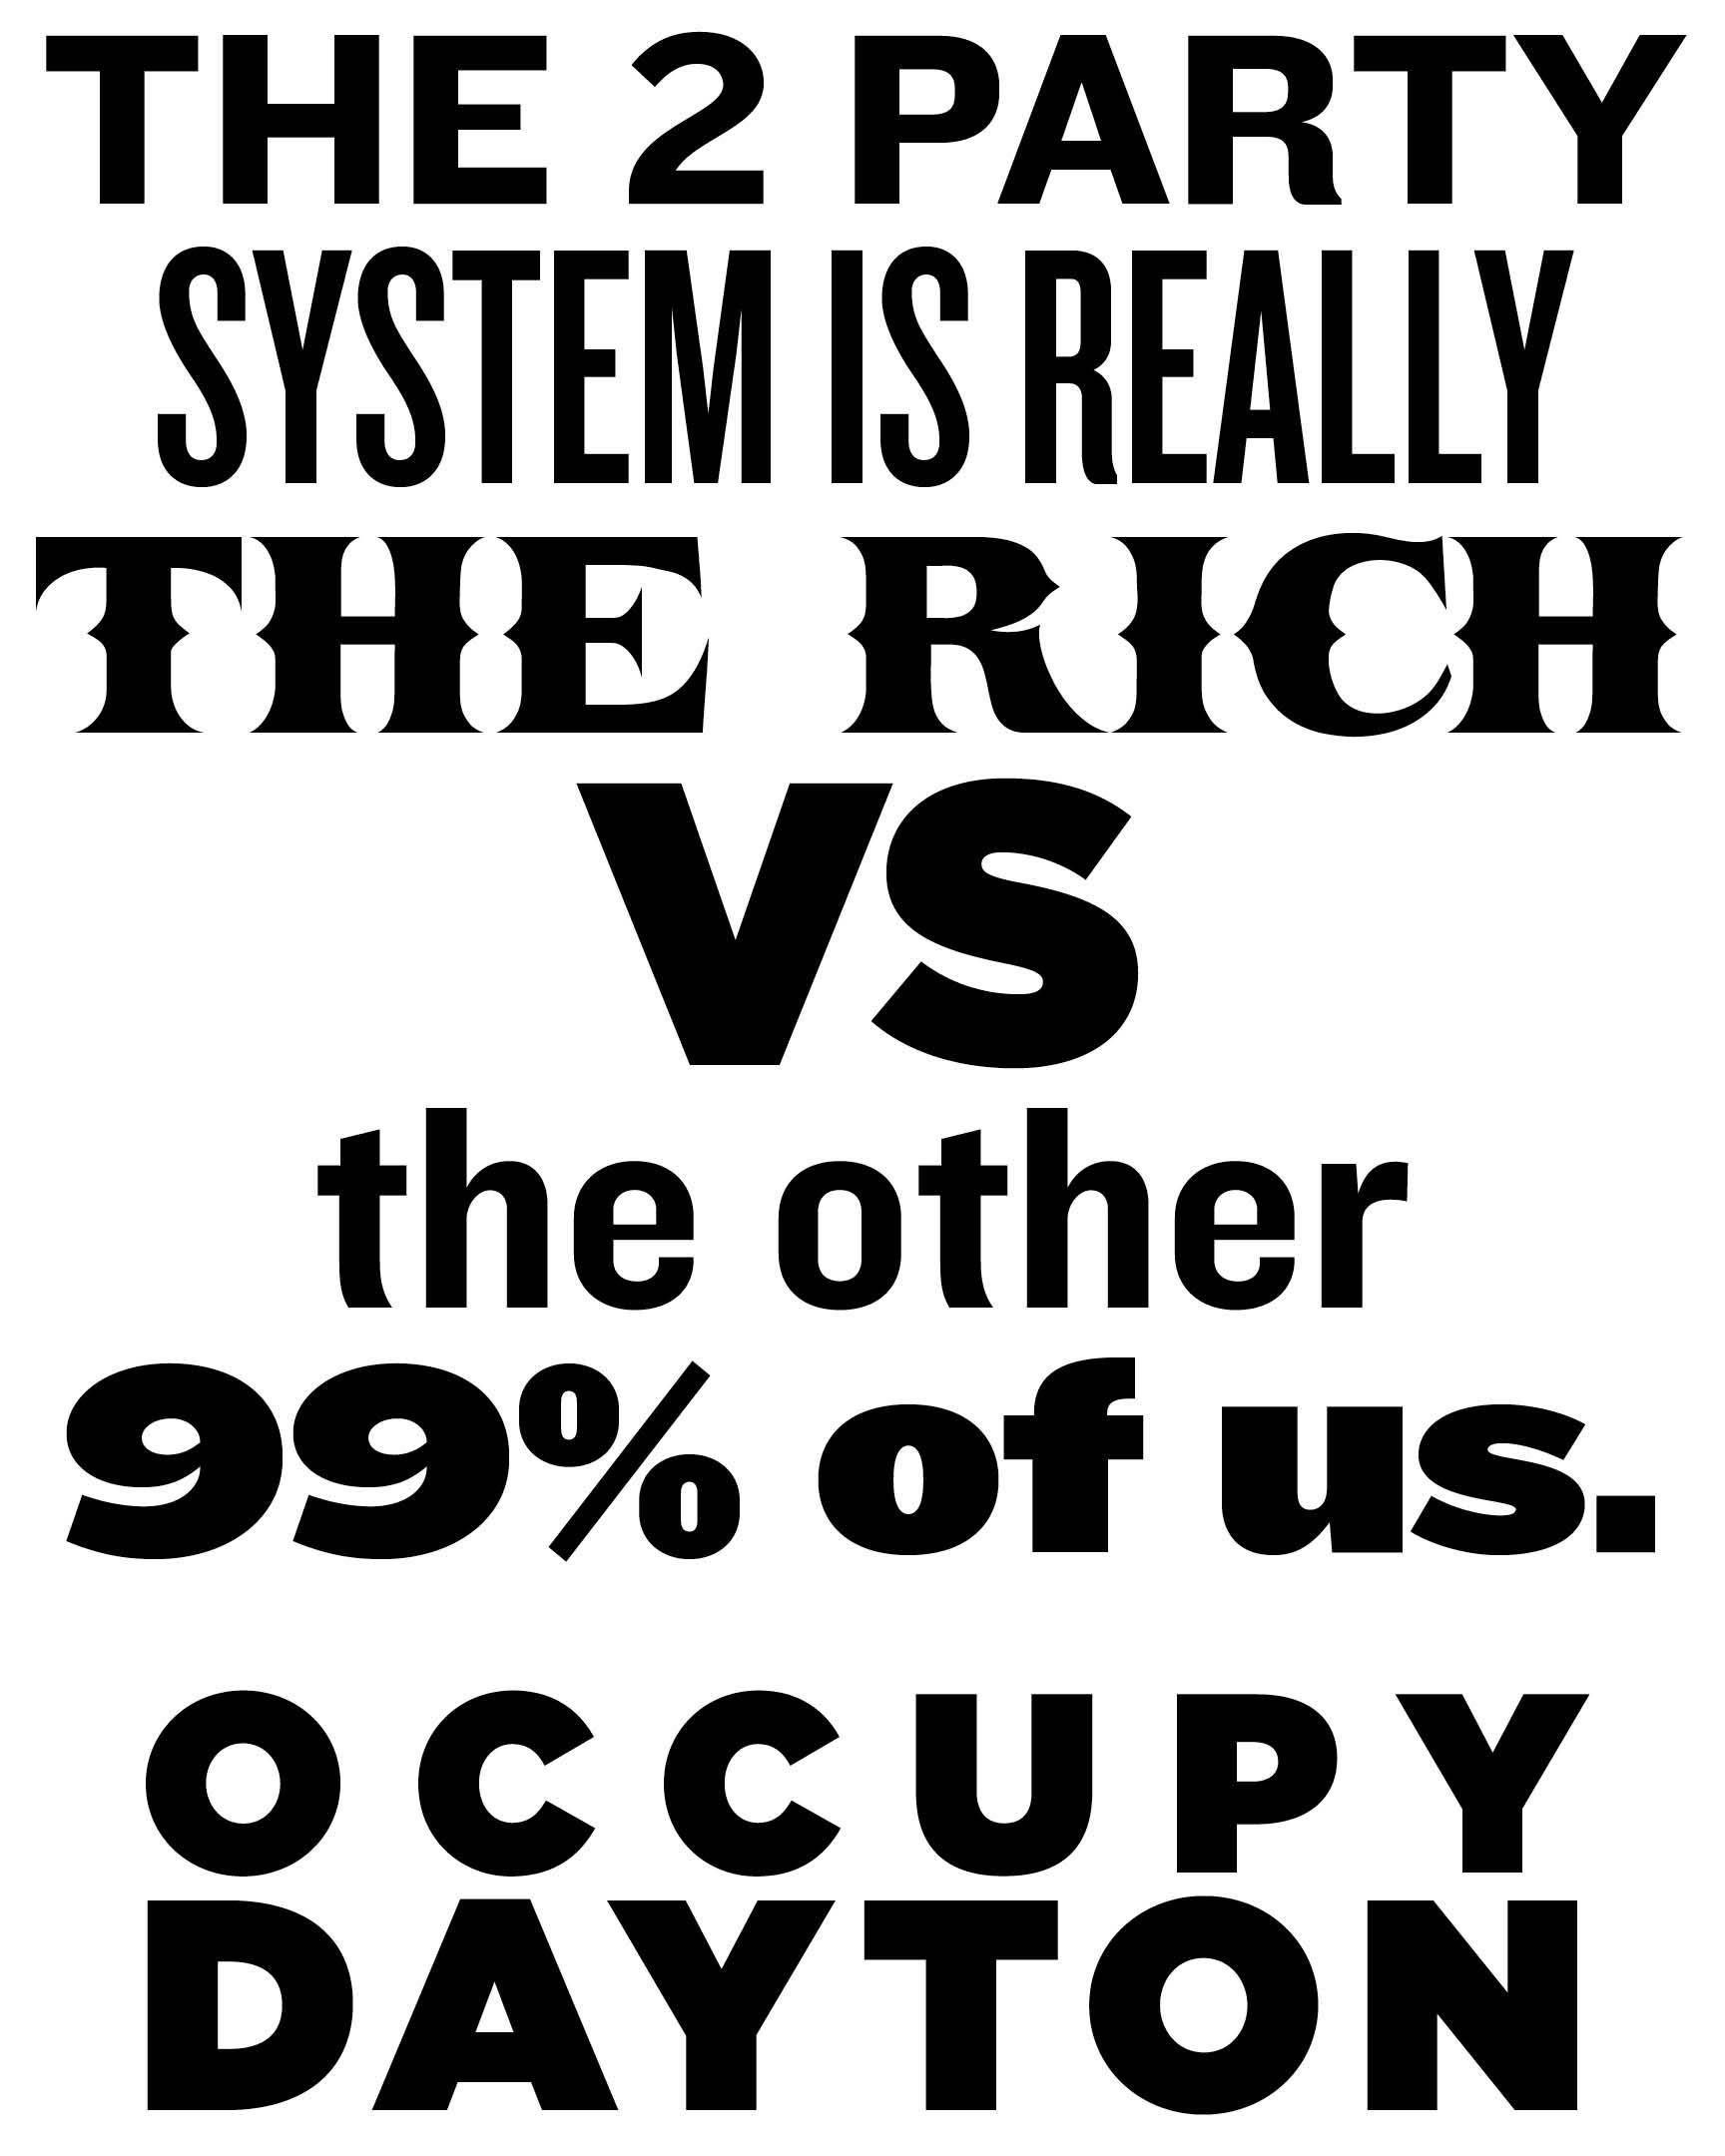 The 2 Party System is really the rich vs the other 99% of us, Occupy Dayton